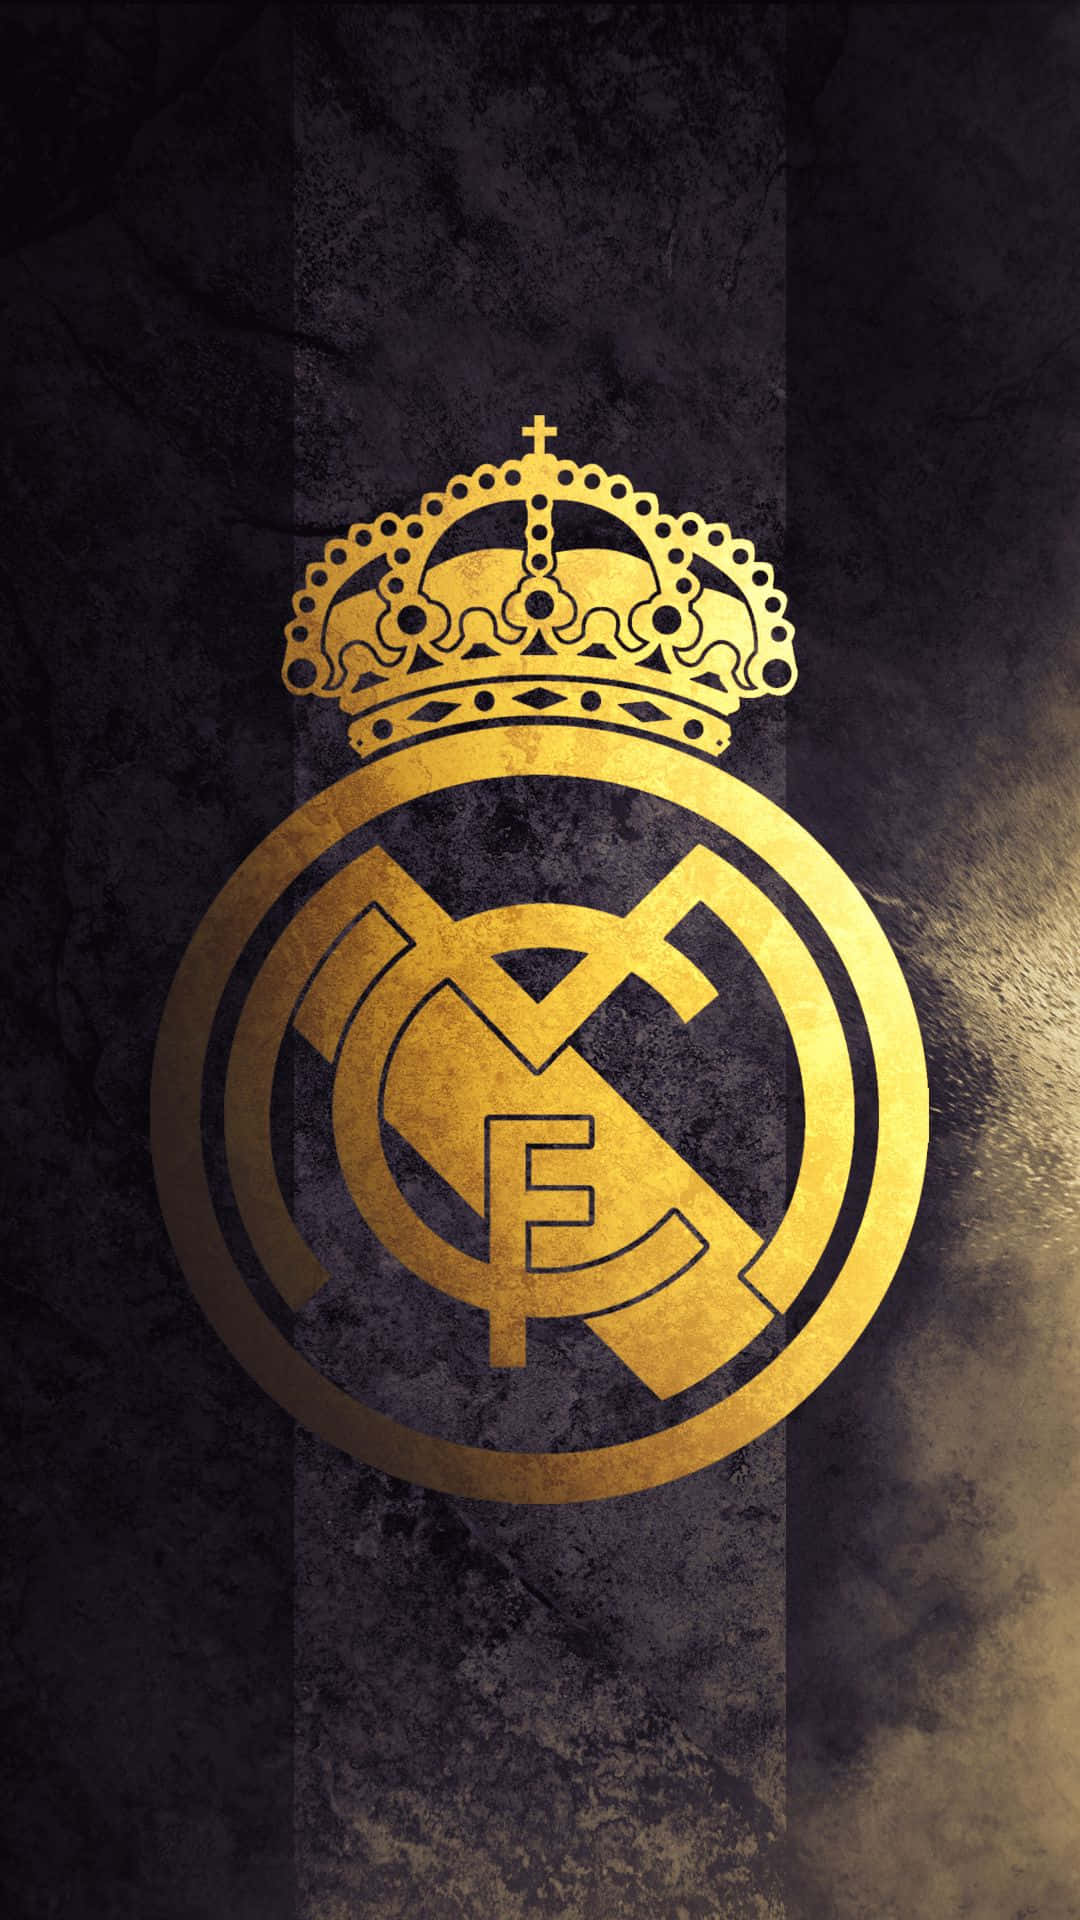 The Greatest Soccer Team in the World - Real Madrid